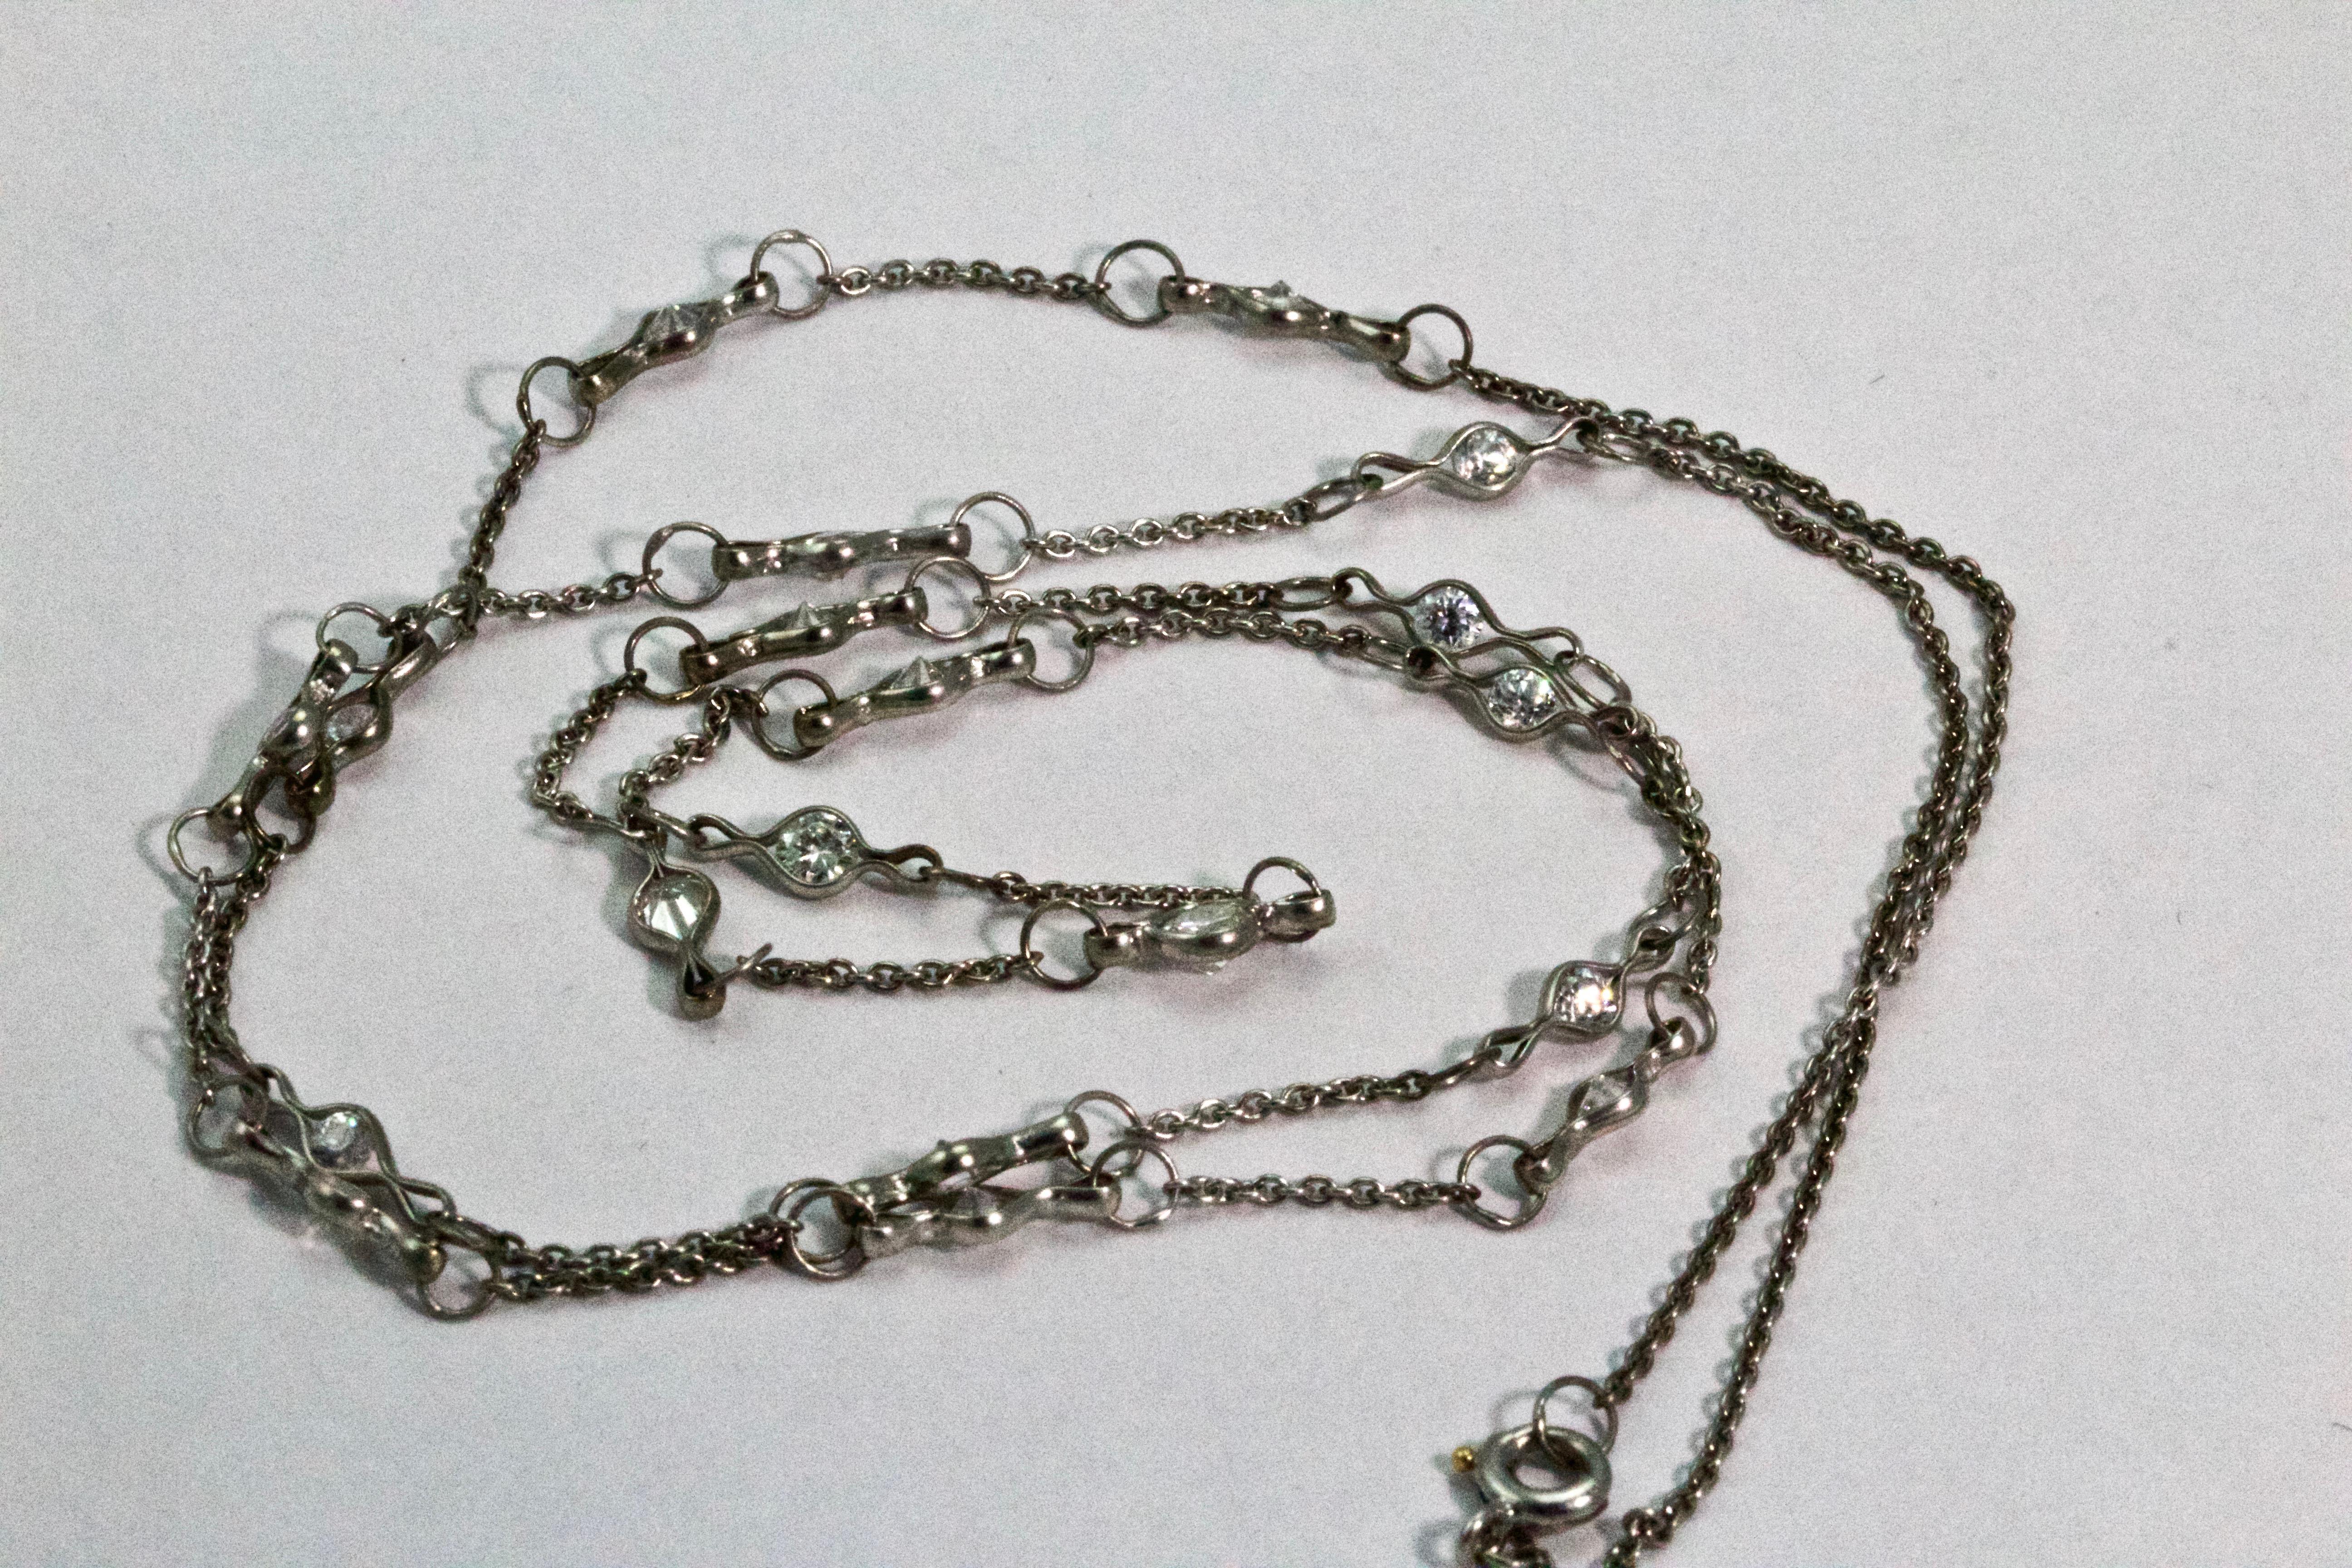 Fashioned circa 1920s this Art Deco long chain is comprised of platinum cable style links to give a chain of approximately 23 inches long. Beautifully embellished with 19 Old European cut diamonds in stylised links. The largest central diamond